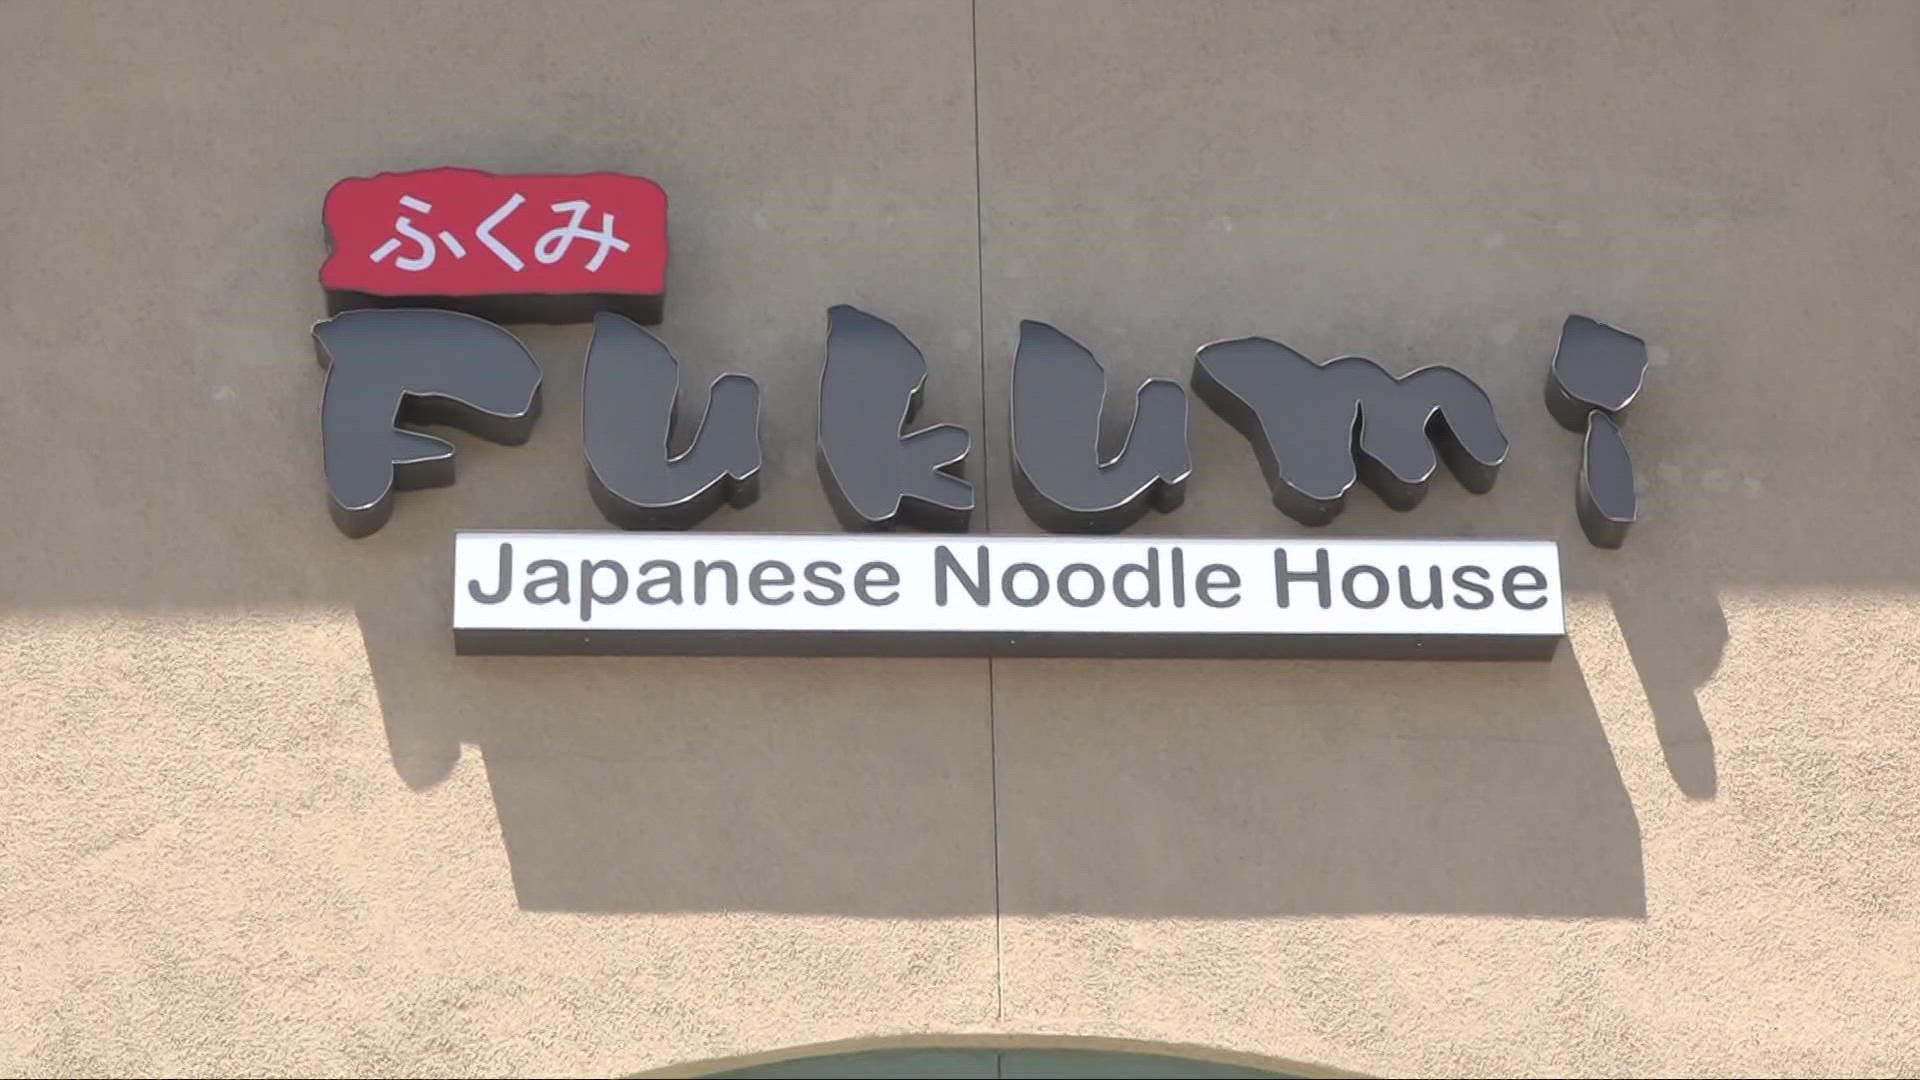 Fukumi Ramen's location in Citrus Heights has been in business for only a year, but the restaurant has been targeted twice by vandals.